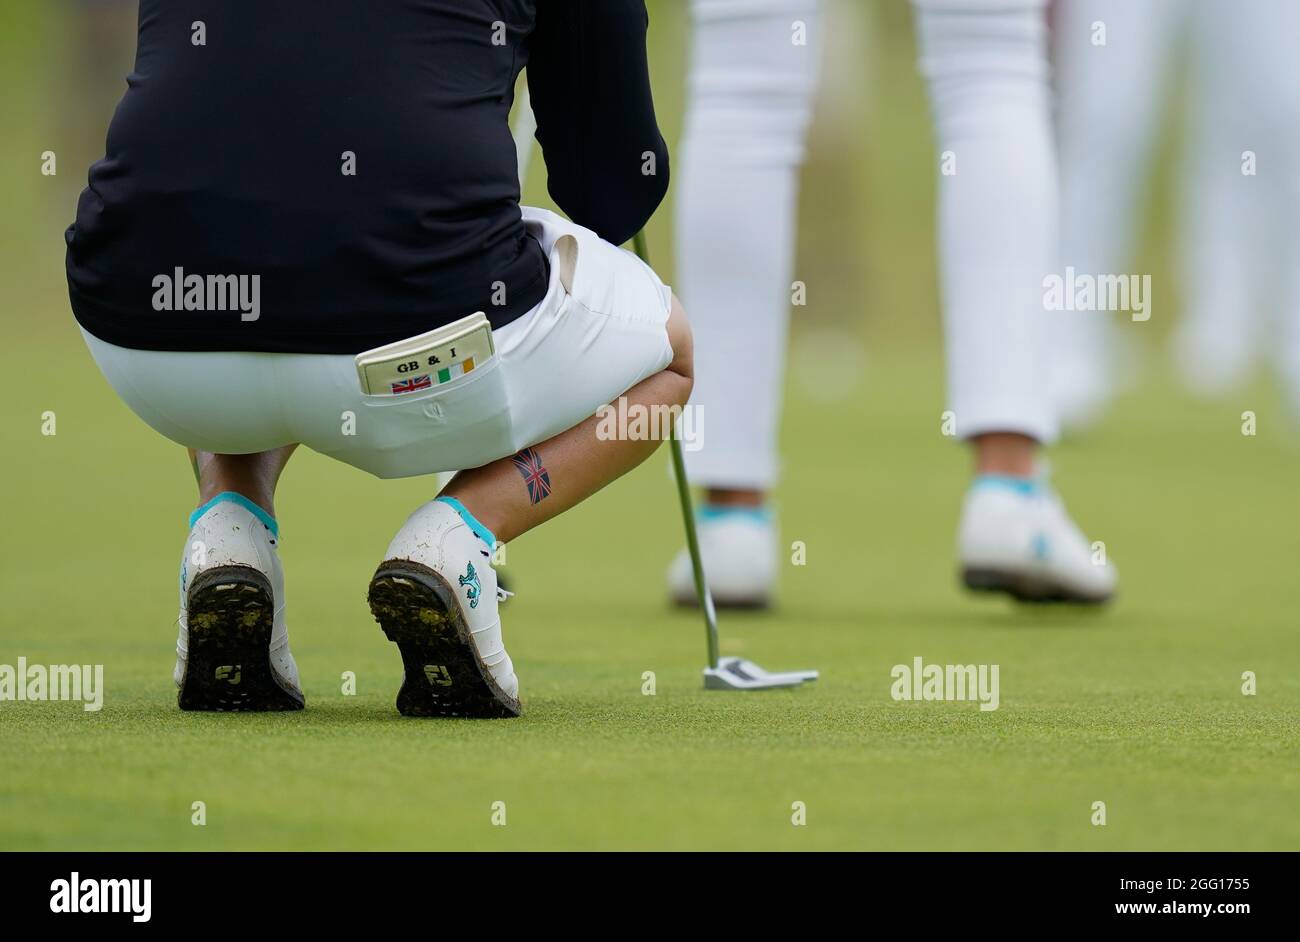 Team GB&I's Emily Toy lines up a putt during the 2021 Curtis Cup Day 1 - Morning Foursomes at Conwy Golf Club, Conwy, Wales on 26/8/21 . (Steve Flynn/ Stock Photo